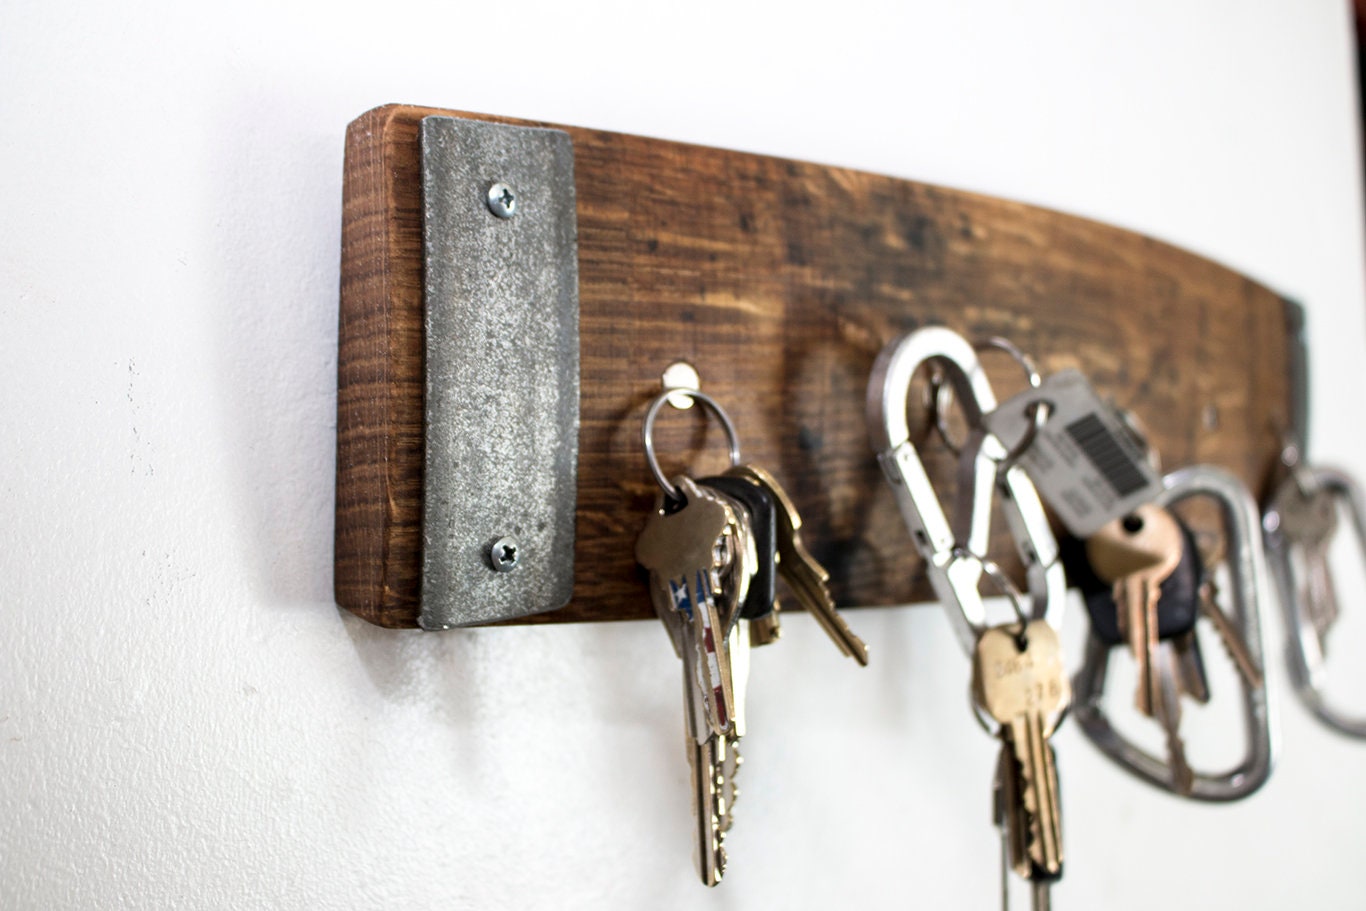 Wall Mounted Magnetic Key Holder - Habere - Made from retired California wine barrels. 100% Recycled!